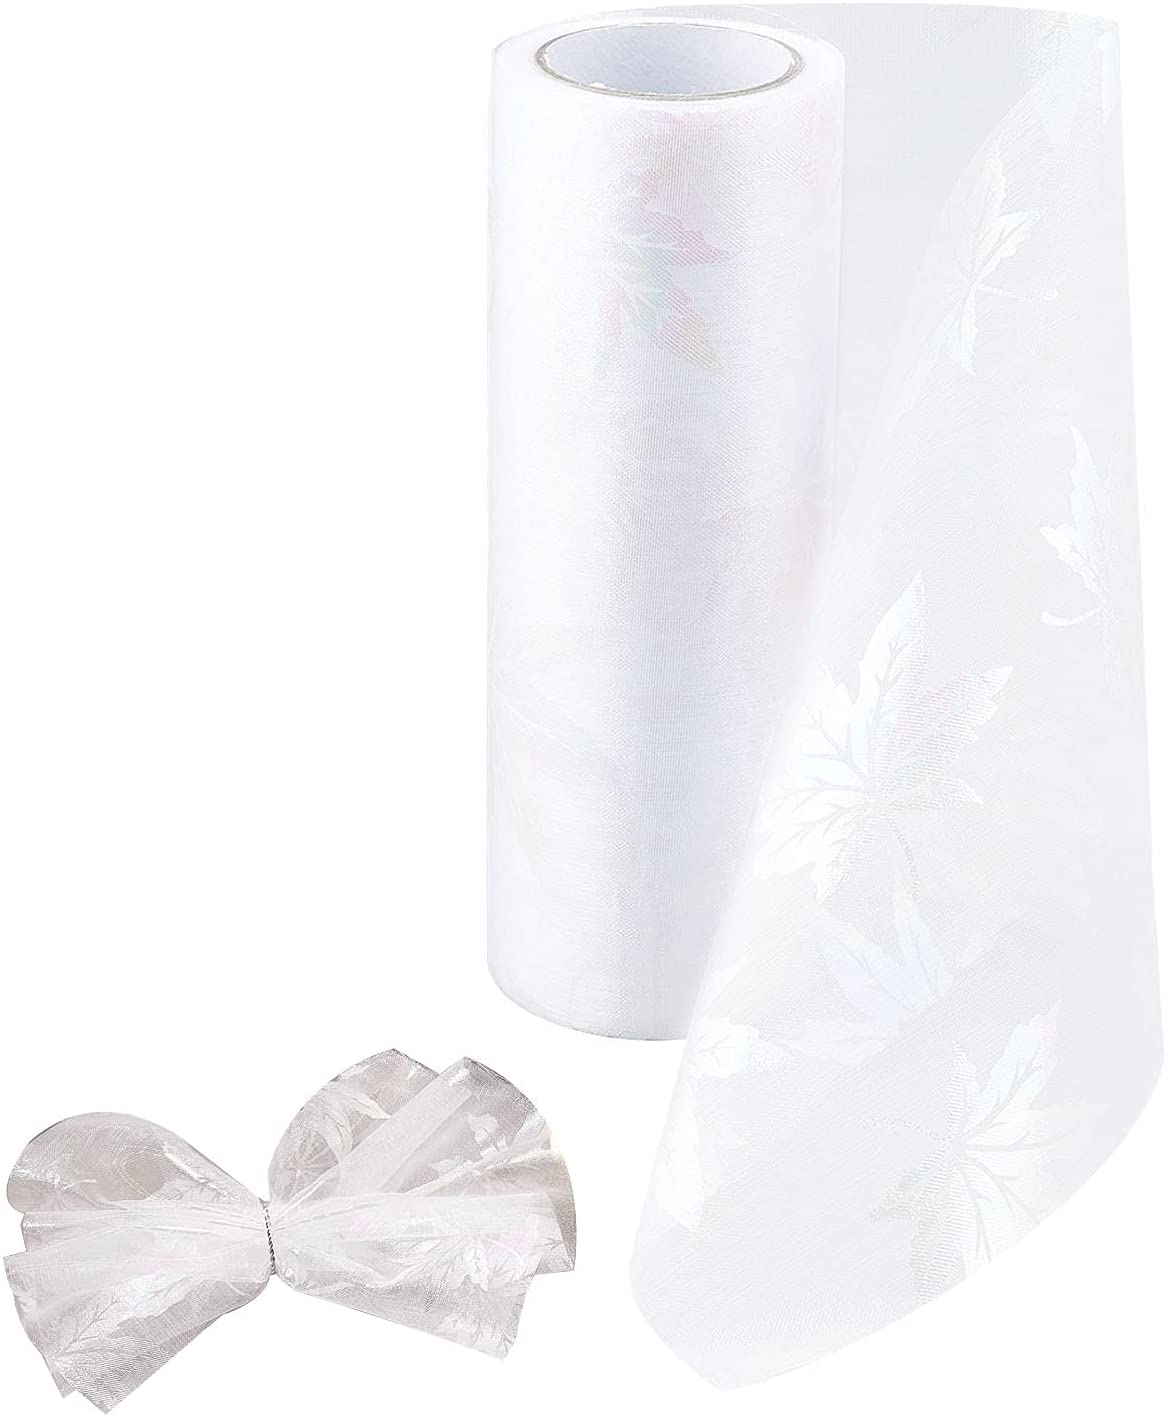 Maple Leaf Tulle Fabric Rolls Tulle Spool Ribbon 6 Inch by 10 Yards for Sewing Wedding Crafts Tutu Skirt Birthday Party Decorations (White)